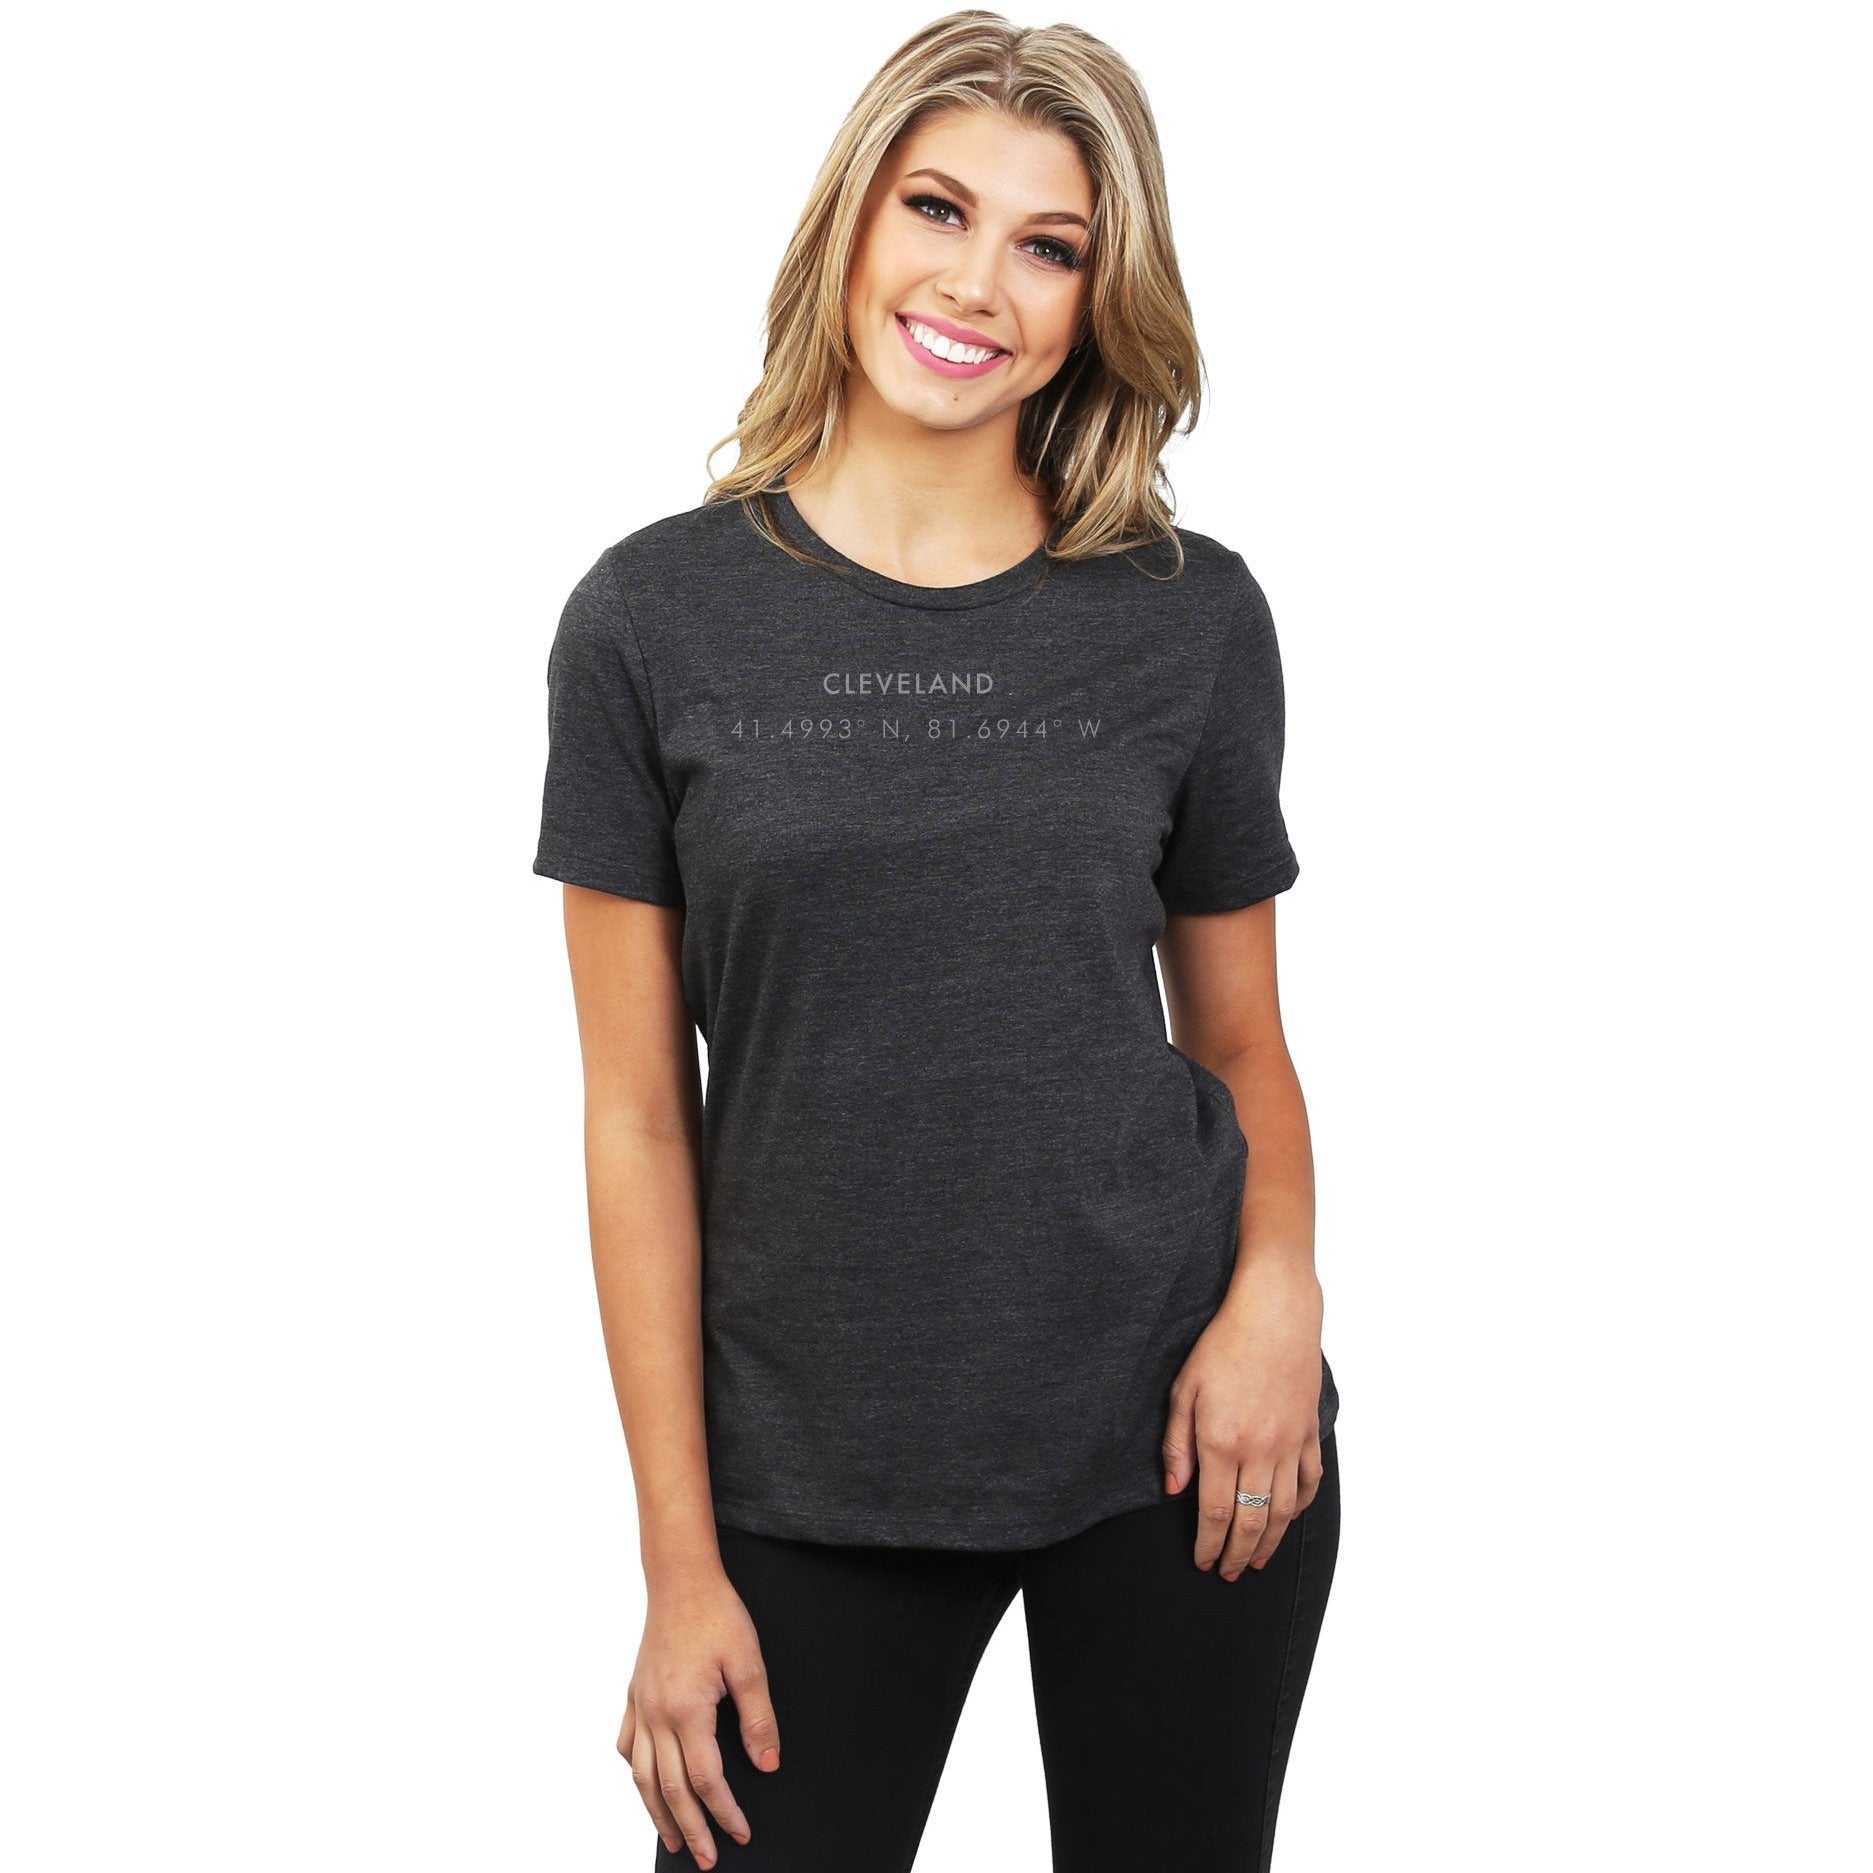 Cleveland Ohio Coordinates Women's Relaxed Crewneck T-Shirt Top Tee Charcoal Model
